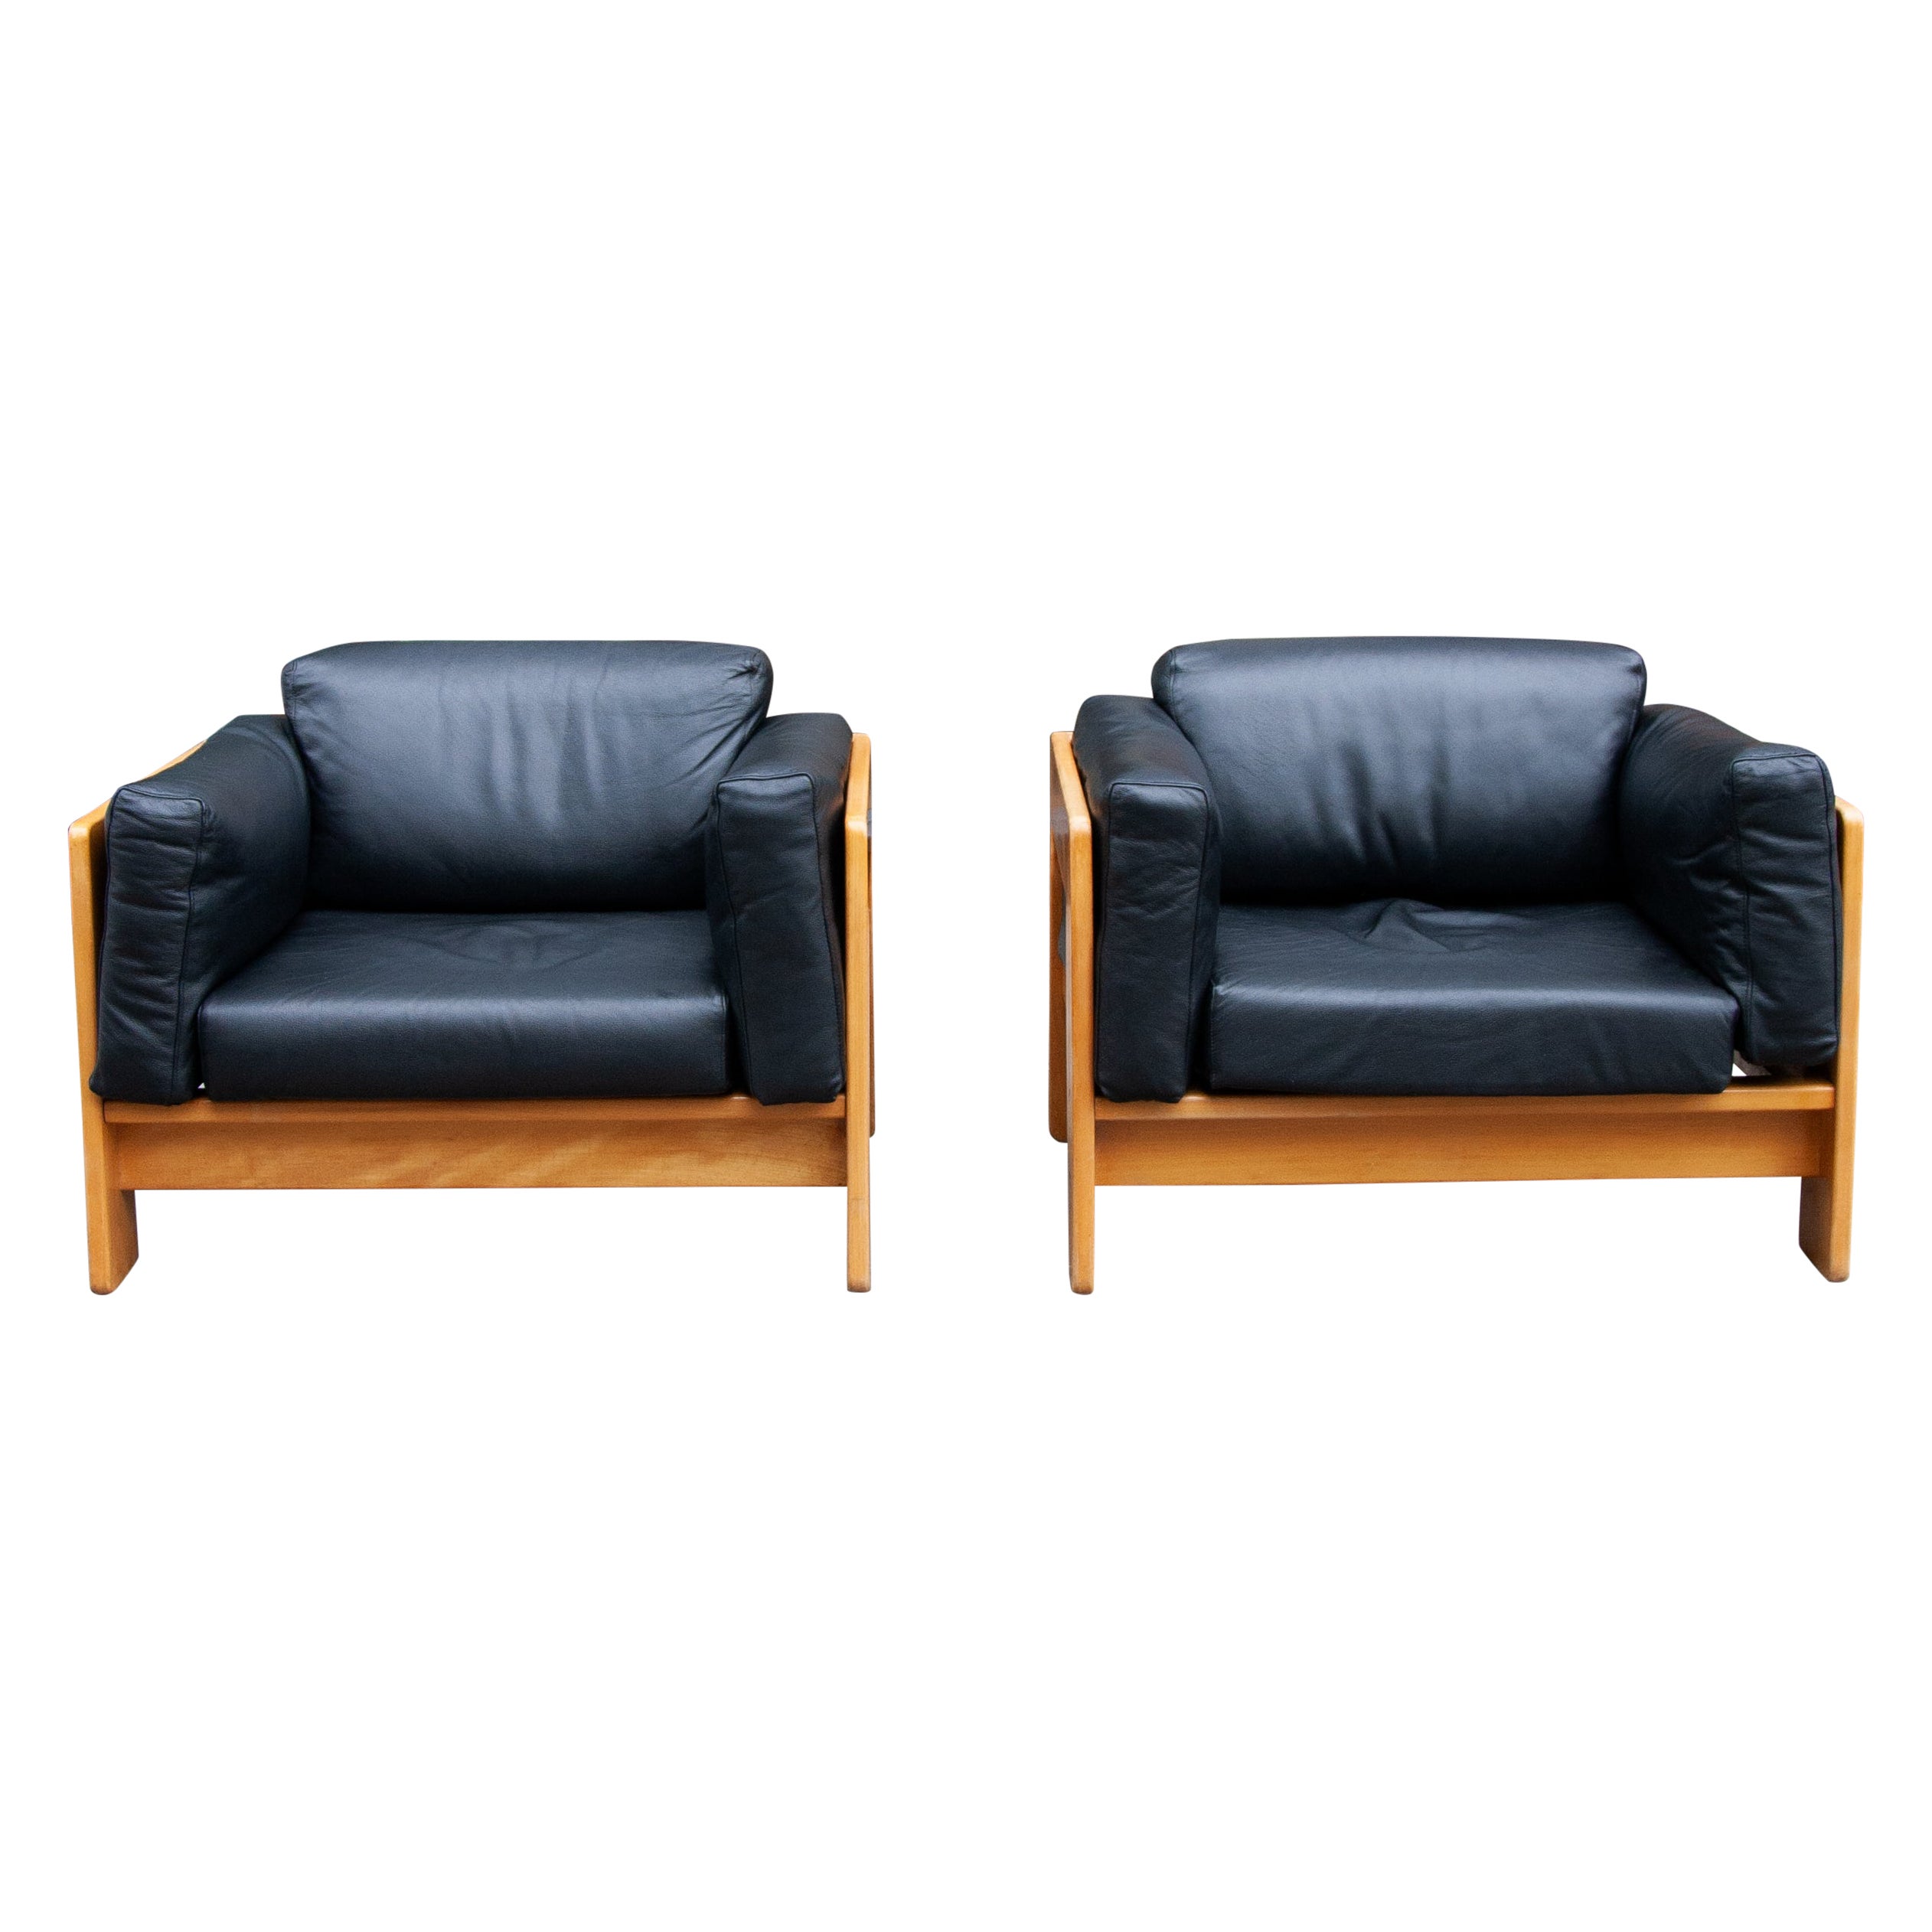 Pair of Beech 'Bastiano' Lounge Chairs, Afra & Tobia Scarpa, Italy, 1960 For Sale